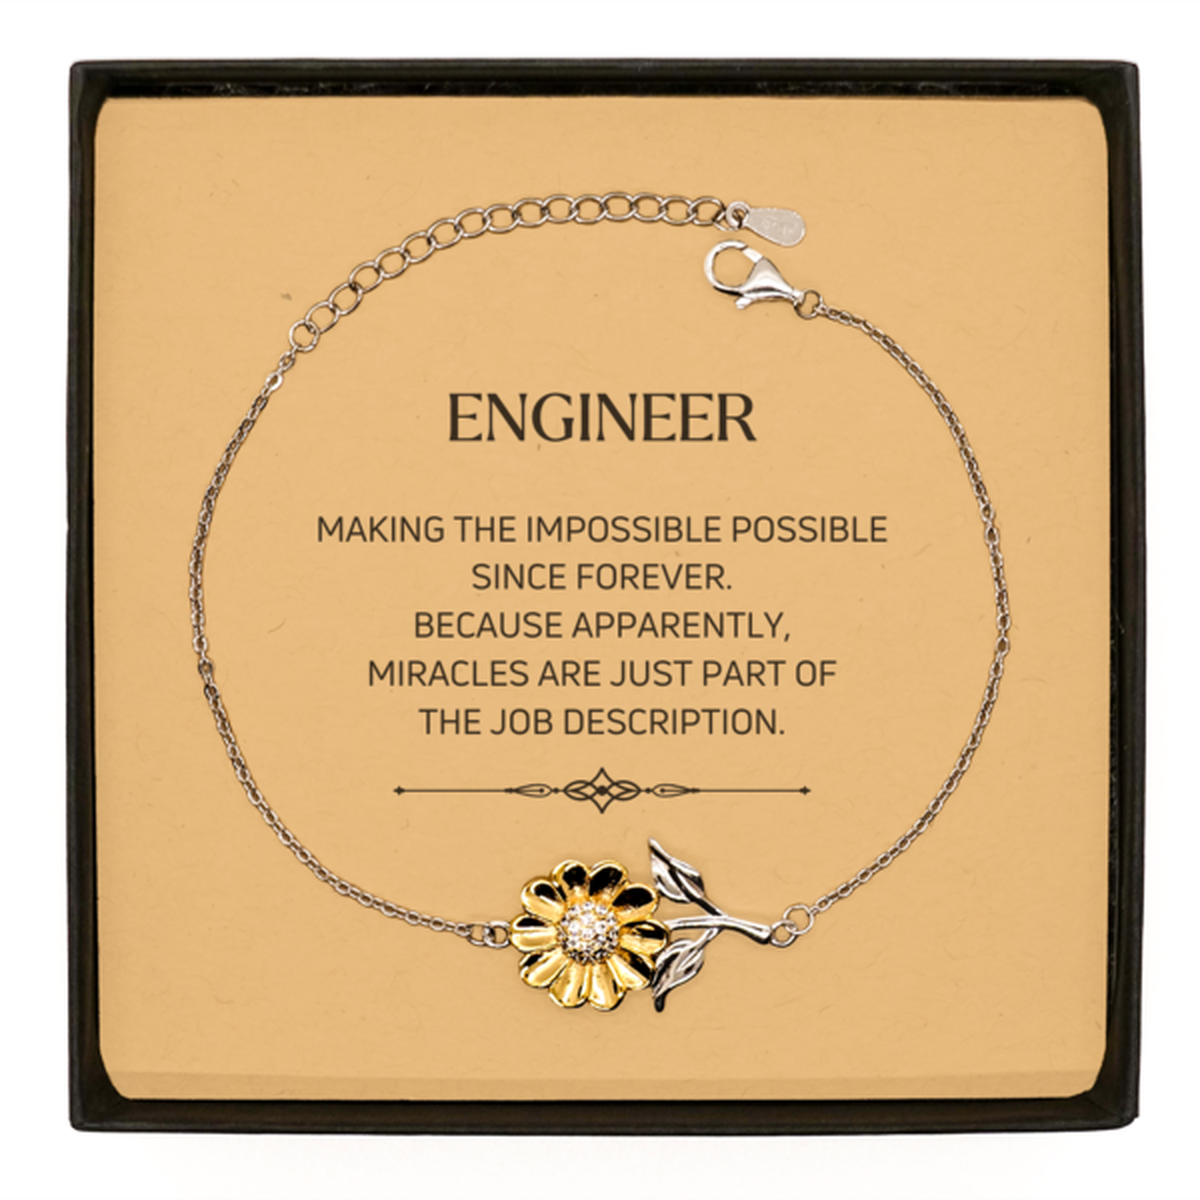 Funny Engineer Gifts, Miracles are just part of the job description, Inspirational Birthday Sunflower Bracelet For Engineer, Men, Women, Coworkers, Friends, Boss